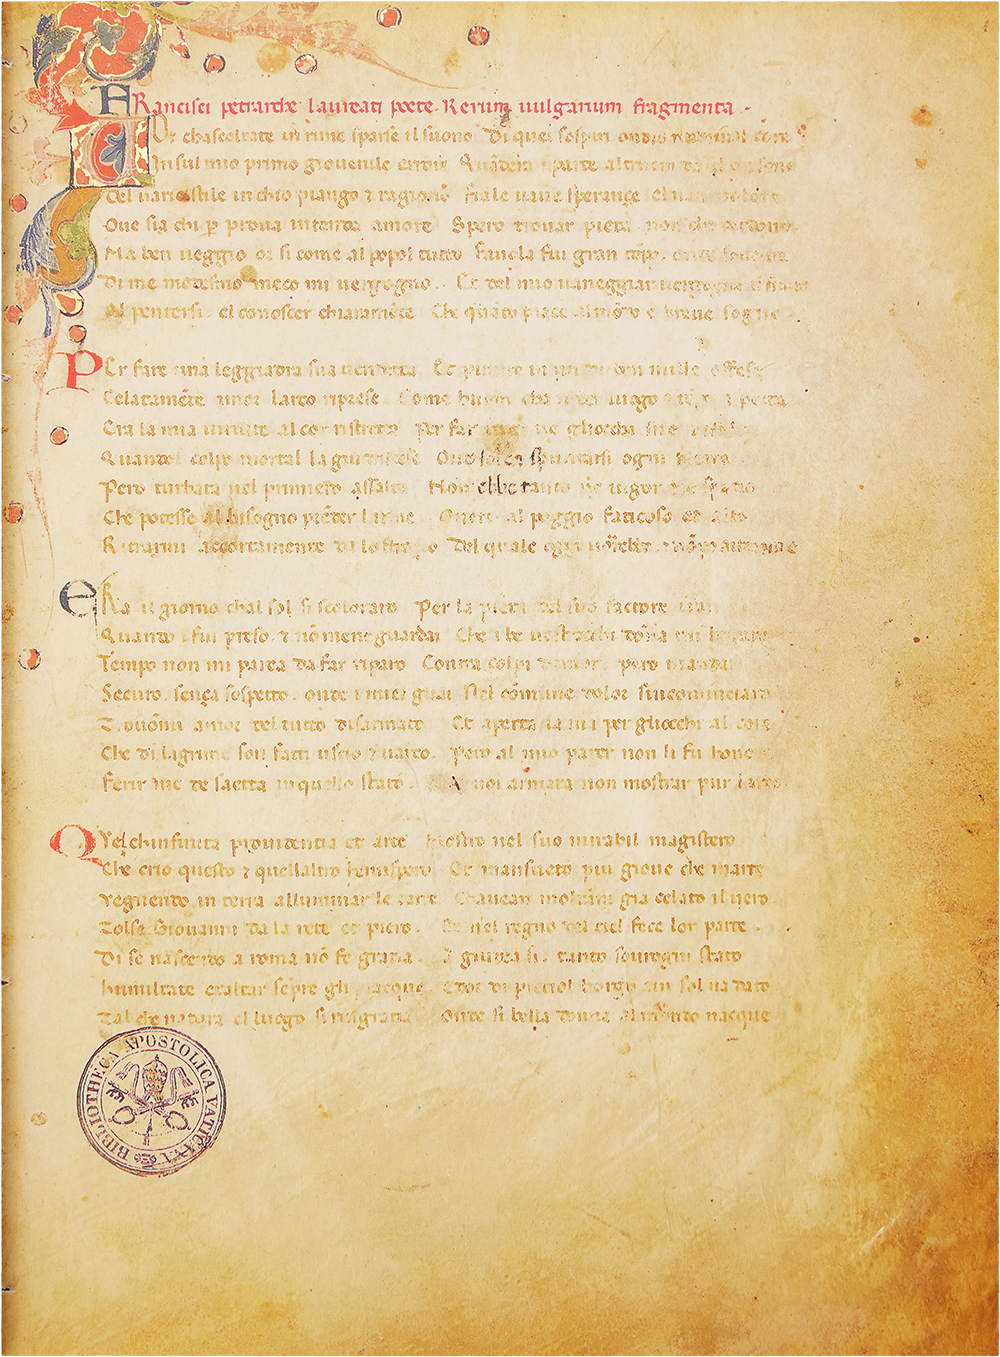 Collection How Petrarca became famous (till 1450) - Page 2